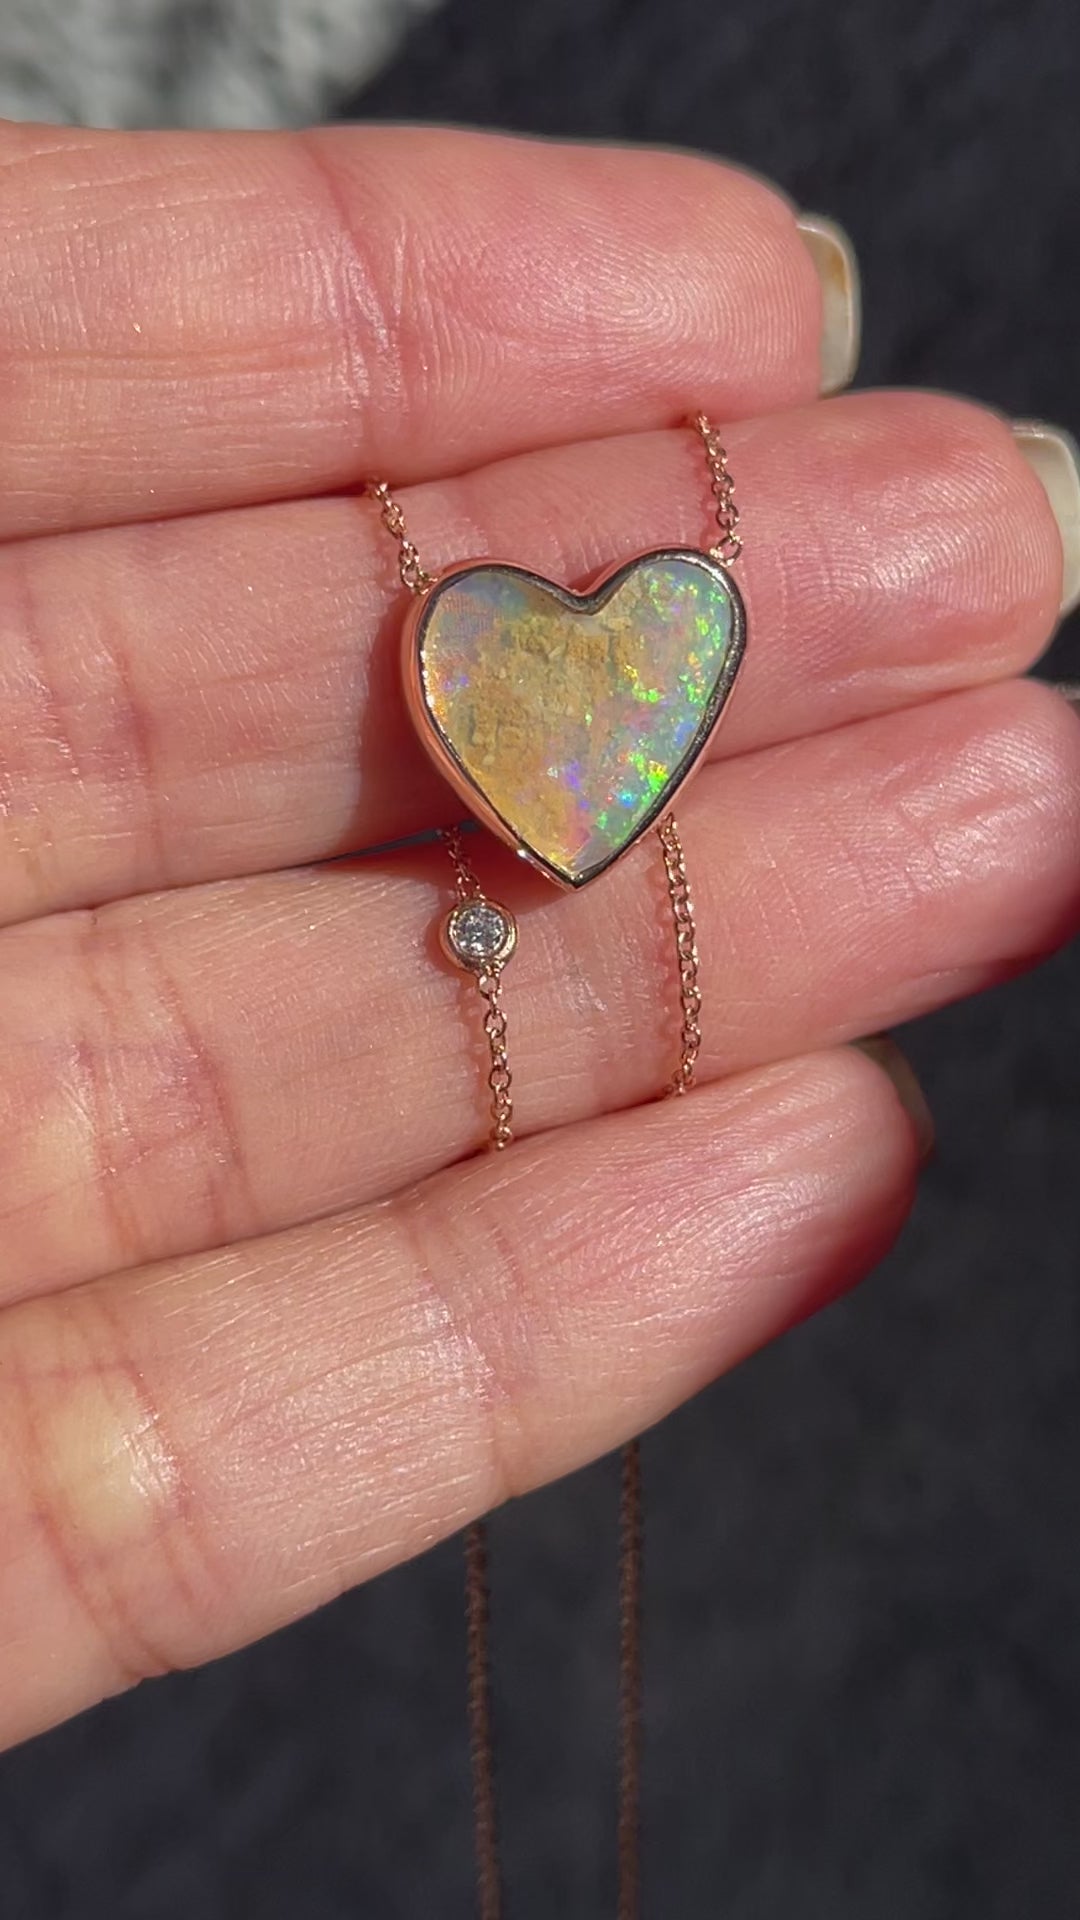 Video of an Australian Opal Necklace by NIXIN Jewelry with an opal heart and diamond set in rose gold.